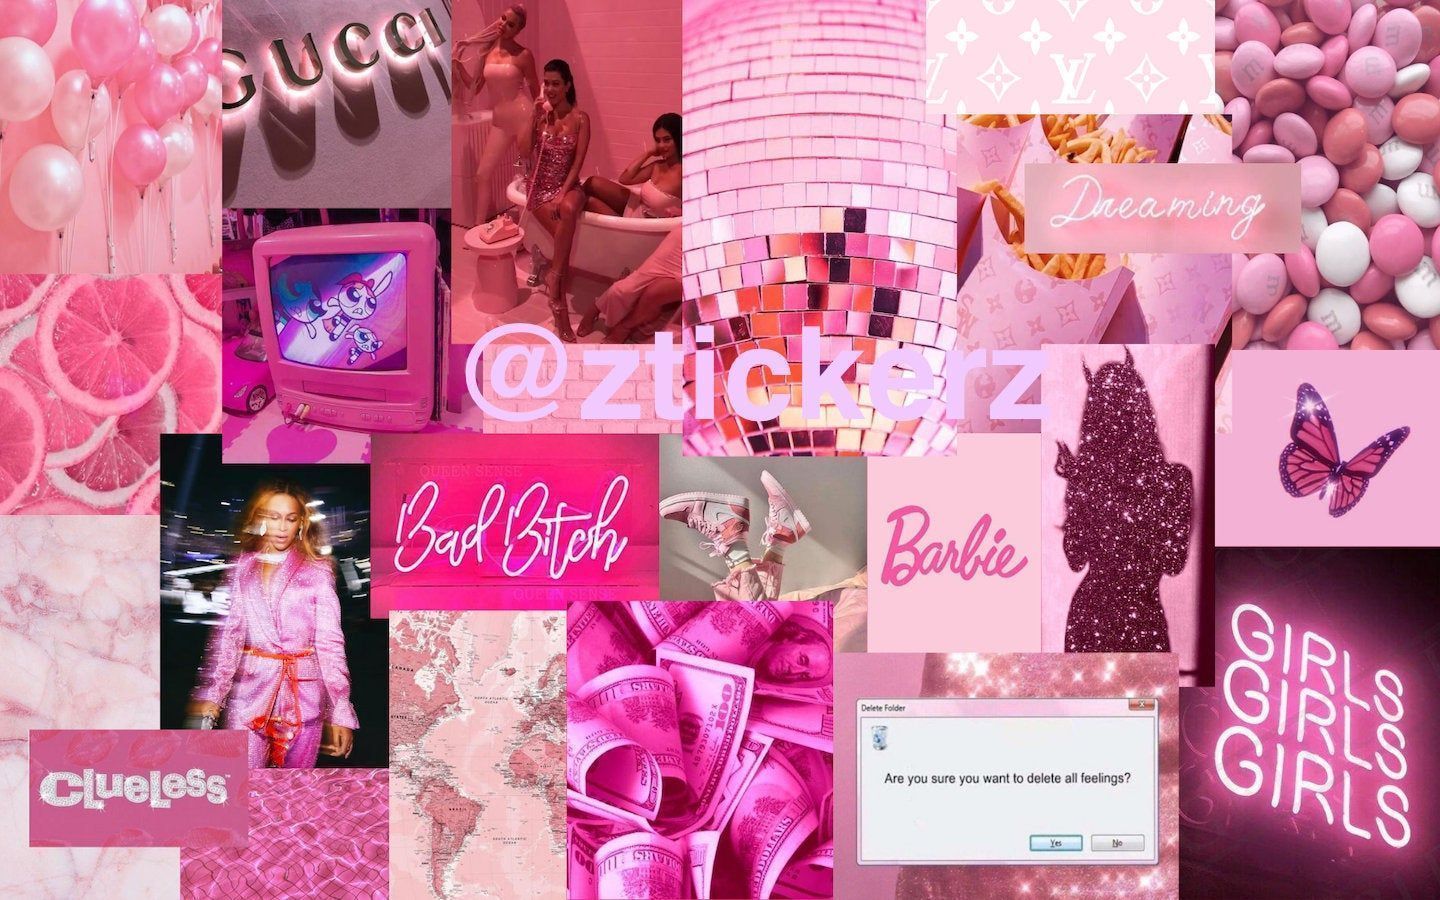 A collage of pink images including a butterfly, a TV, a mirror ball, a woman in a white dress, a woman in a white crop top, a woman in a white skirt, a woman in a white bra, a woman in a white shorts, a woman in a white top, a woman in a white skirt, a woman in a white crop top, a woman in a white bra, a woman in a white shorts, a woman in a white top, a woman in a white skirt, a woman in a white crop top, a woman in a white bra, a woman in a white shorts, a woman in a white top, a woman in a white skirt, a woman in a white crop top, a woman in a white bra, a woman in a white shorts, a woman in a white top, a woman in a white skirt, a woman in a white crop top, a woman in a white bra, a woman in a white shorts, a woman in a white top, a woman in a white skirt, a woman in a white crop top, a woman in a white bra, a woman in a white shorts, a woman in a white top, a woman in a white skirt, a woman in a white crop top, a woman in a white bra, a woman in a white shorts, a woman in a white top, a woman in a white skirt, a woman in a white crop top, a woman in a white bra, a woman in a white shorts, a woman in a white top, a woman in a white skirt, a woman in a white crop top, a woman in a white bra, a woman in a white shorts, a woman in a white top, a woman in a white skirt, a woman in a white crop top, a woman in a white bra, a woman in a white shorts, a woman in a white top, a woman in a white skirt, a woman in a white crop top, a woman in a white bra, a woman in a white shorts, a woman in a white top, a woman in a white skirt, a woman in a white crop top, a woman in a white bra, a woman in a white shorts, a woman in a white top, a woman in a white skirt, a woman in a white crop top, a woman in a white bra, a woman in a white shorts, a woman in a white top, a woman in a white skirt, a woman in a white crop top, a woman in a white - Barbie